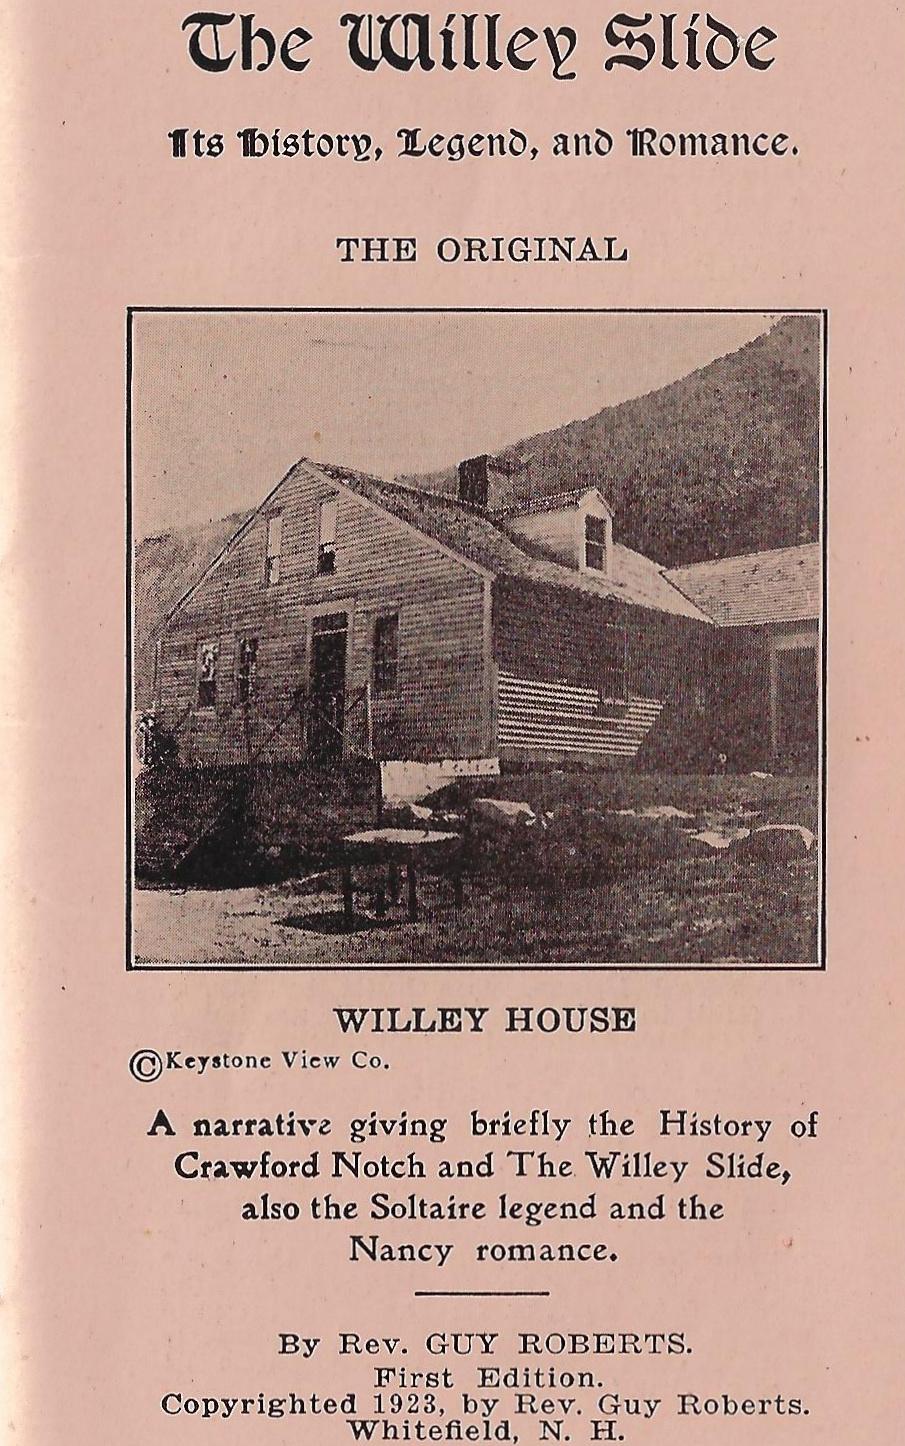 The Willey Slide - Its History, Legend & Romance 1923 - Rev Guy Roberts